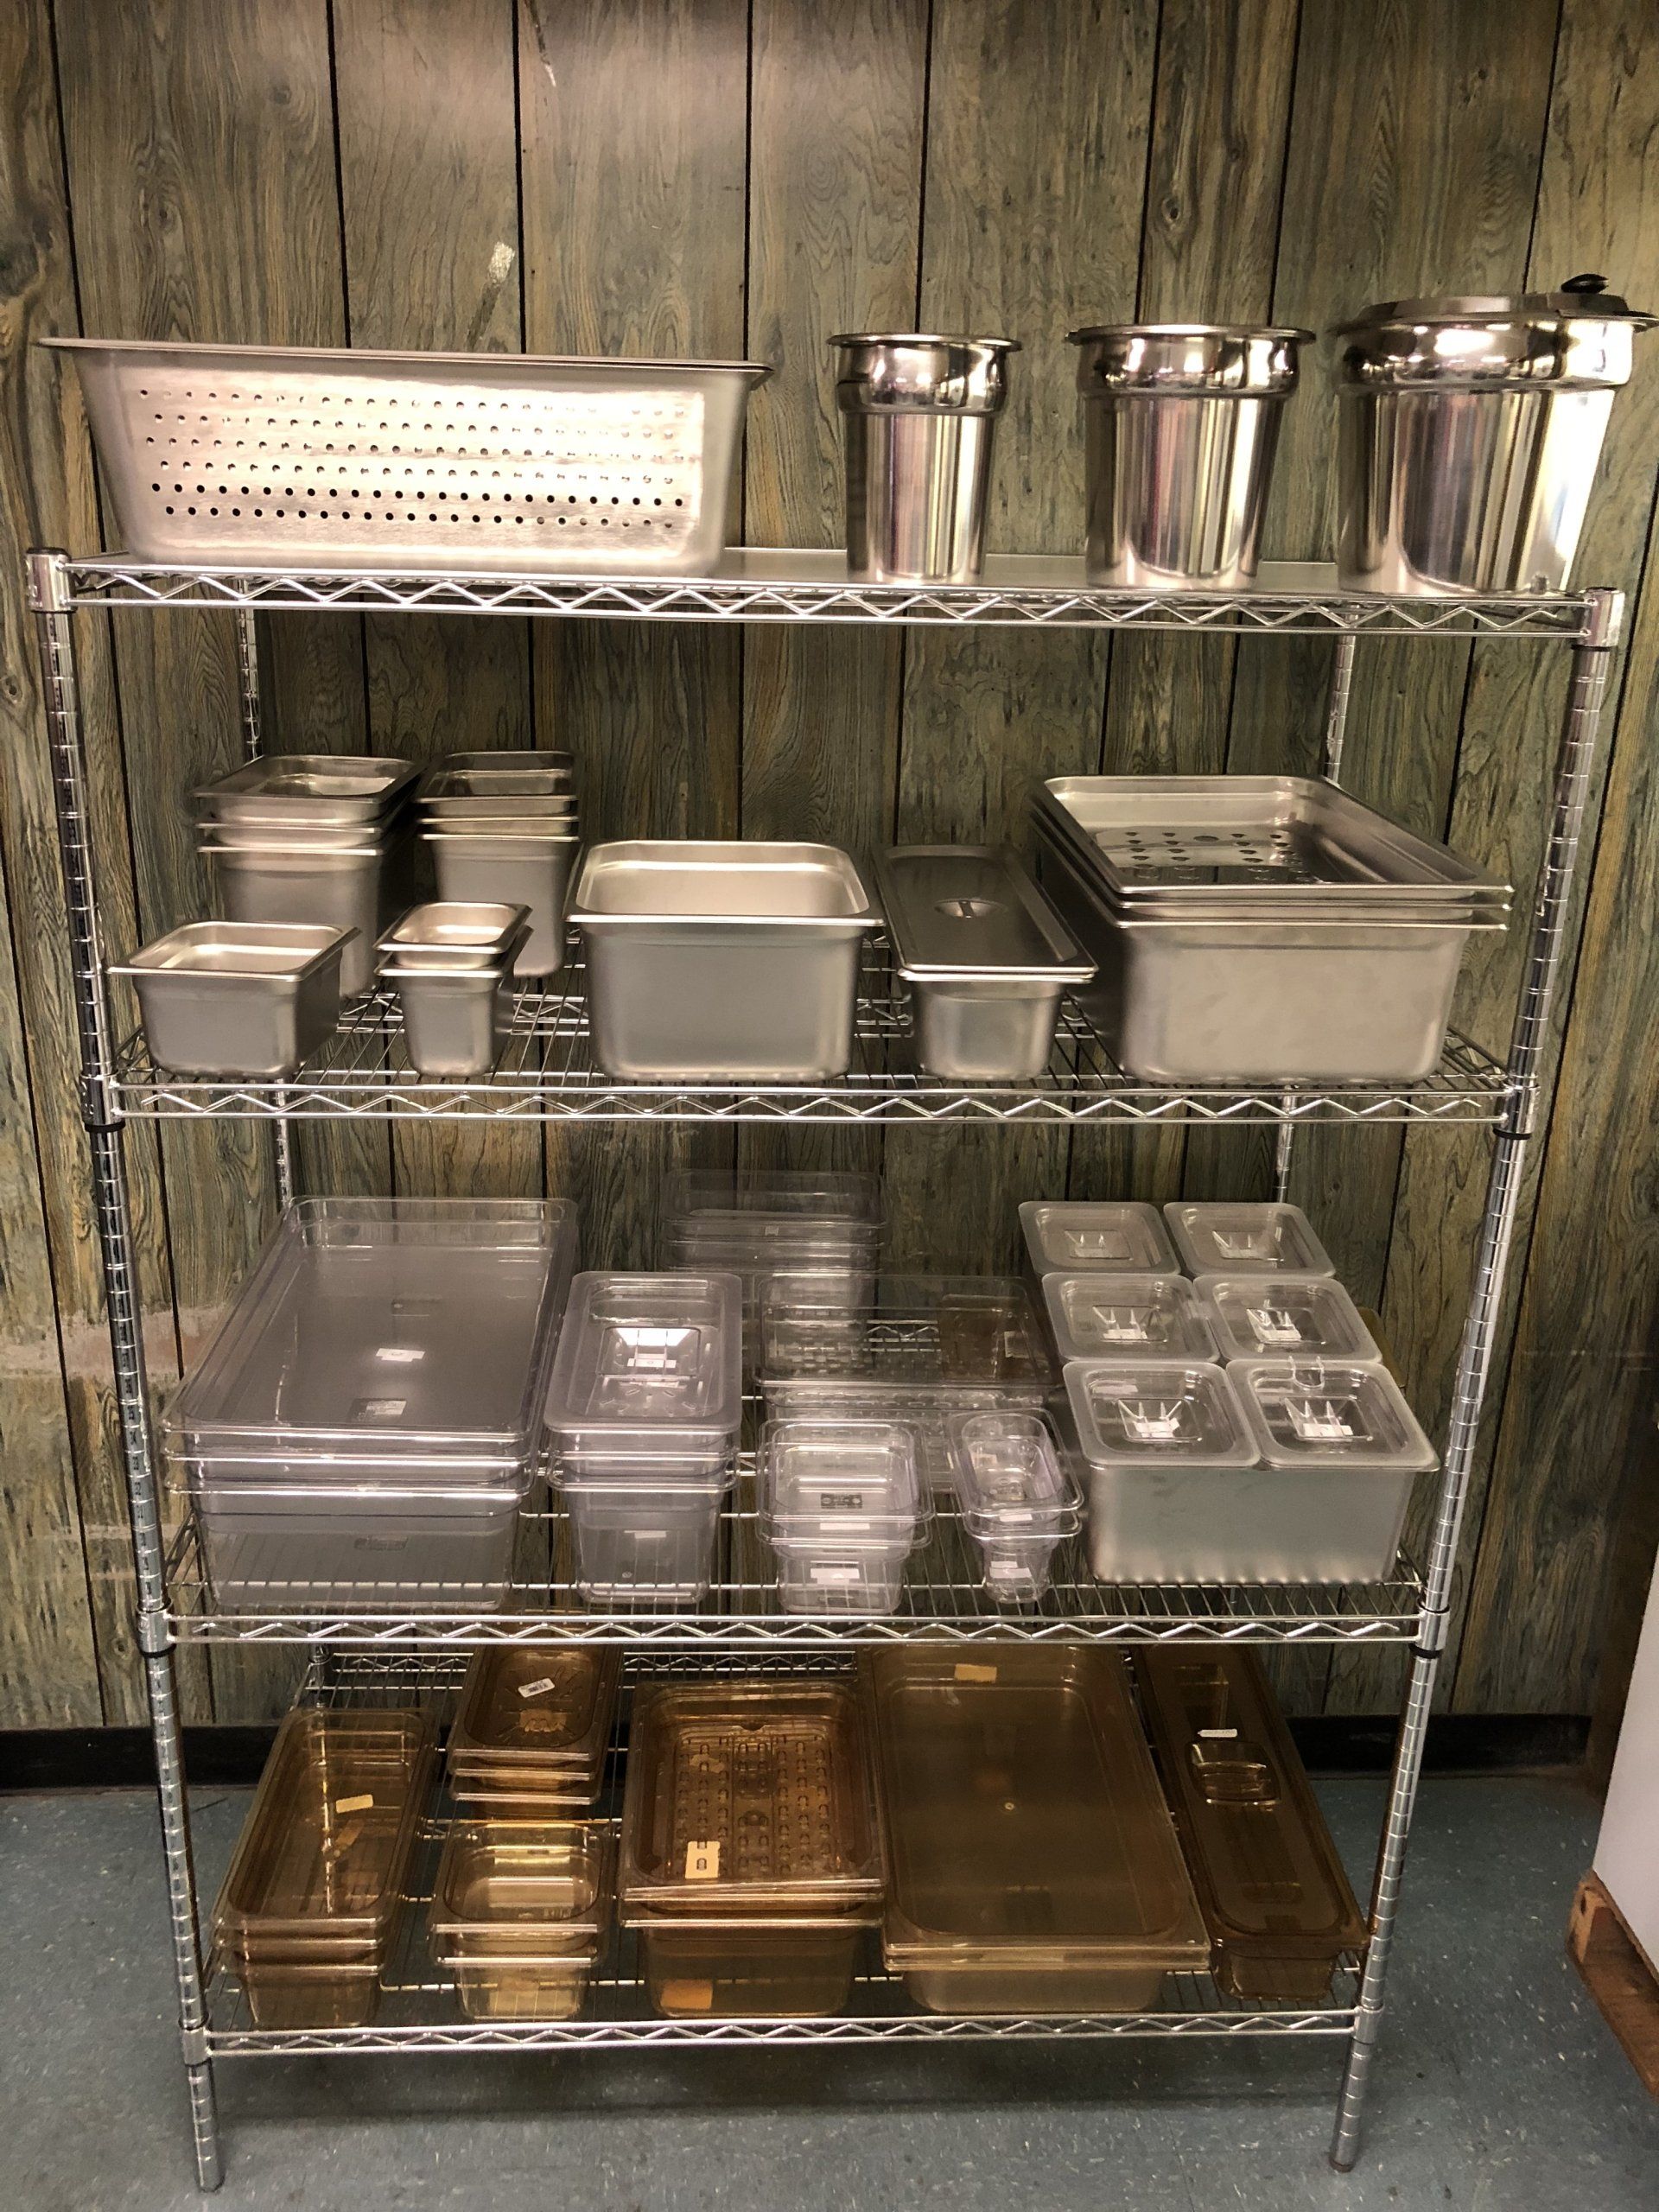 A shelf filled with stainless steel pans and plastic containers.